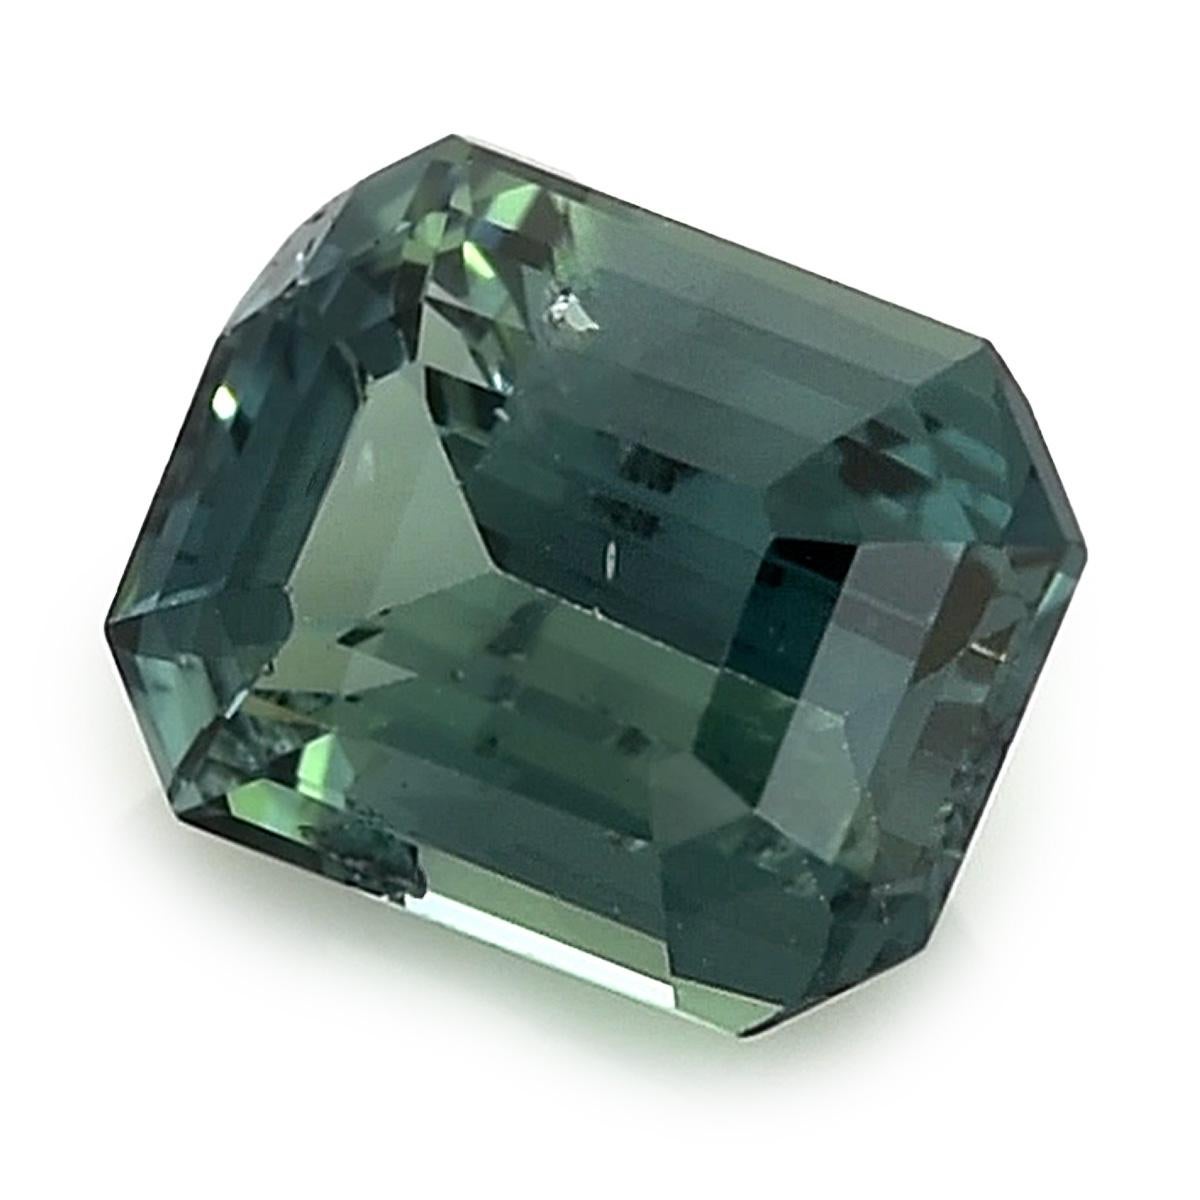 Presenting a Natural Green Blue Sapphire, distinguished by its weight of 1.52 carats. This alluring gem showcases an Emerald shape with precise dimensions measuring 7.08 x 5.55 x 3.89 mm. The Brilliant/Step cut enhances its radiance, unveiling a